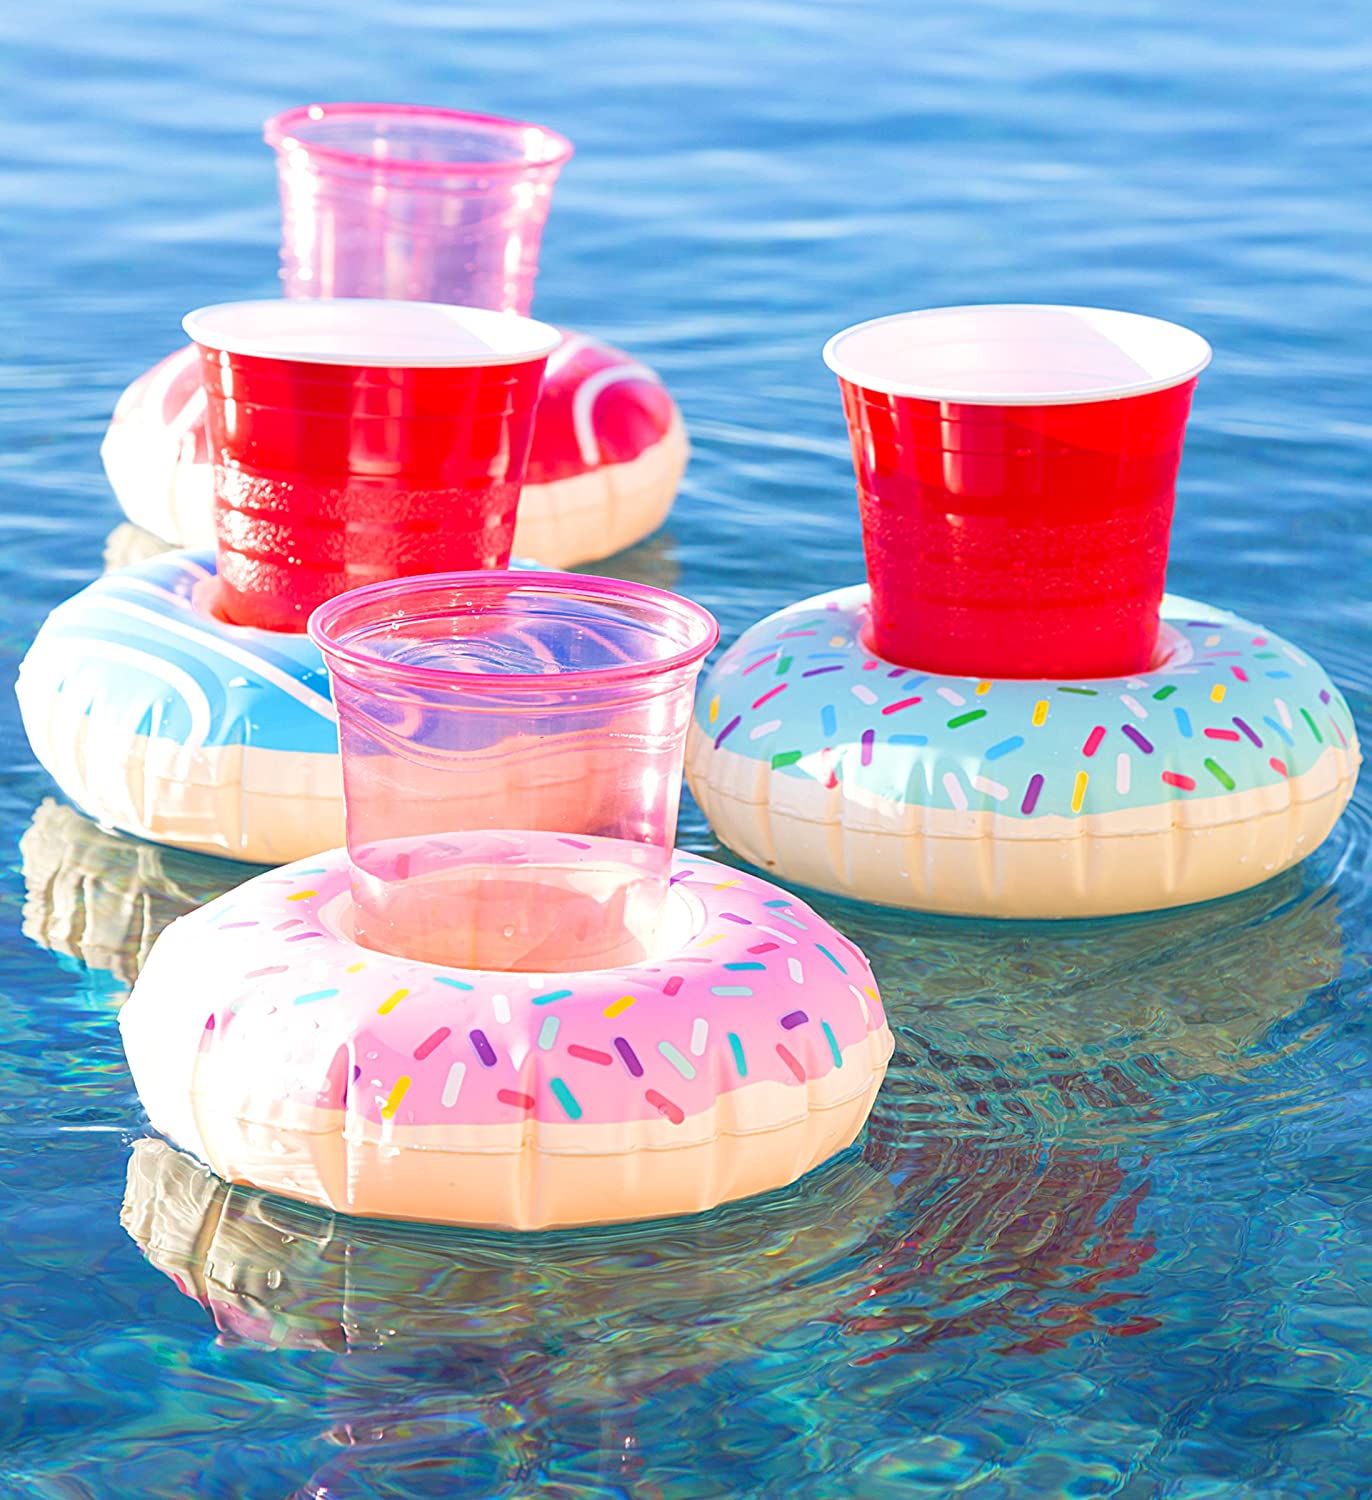 CoTa Global Pool Party – Funny Delectable Frosted Donut Inspired Inflatable Ring Drink Holder - Set of 4 - for The Beach, Pool Party - Heavy Duty - UV...